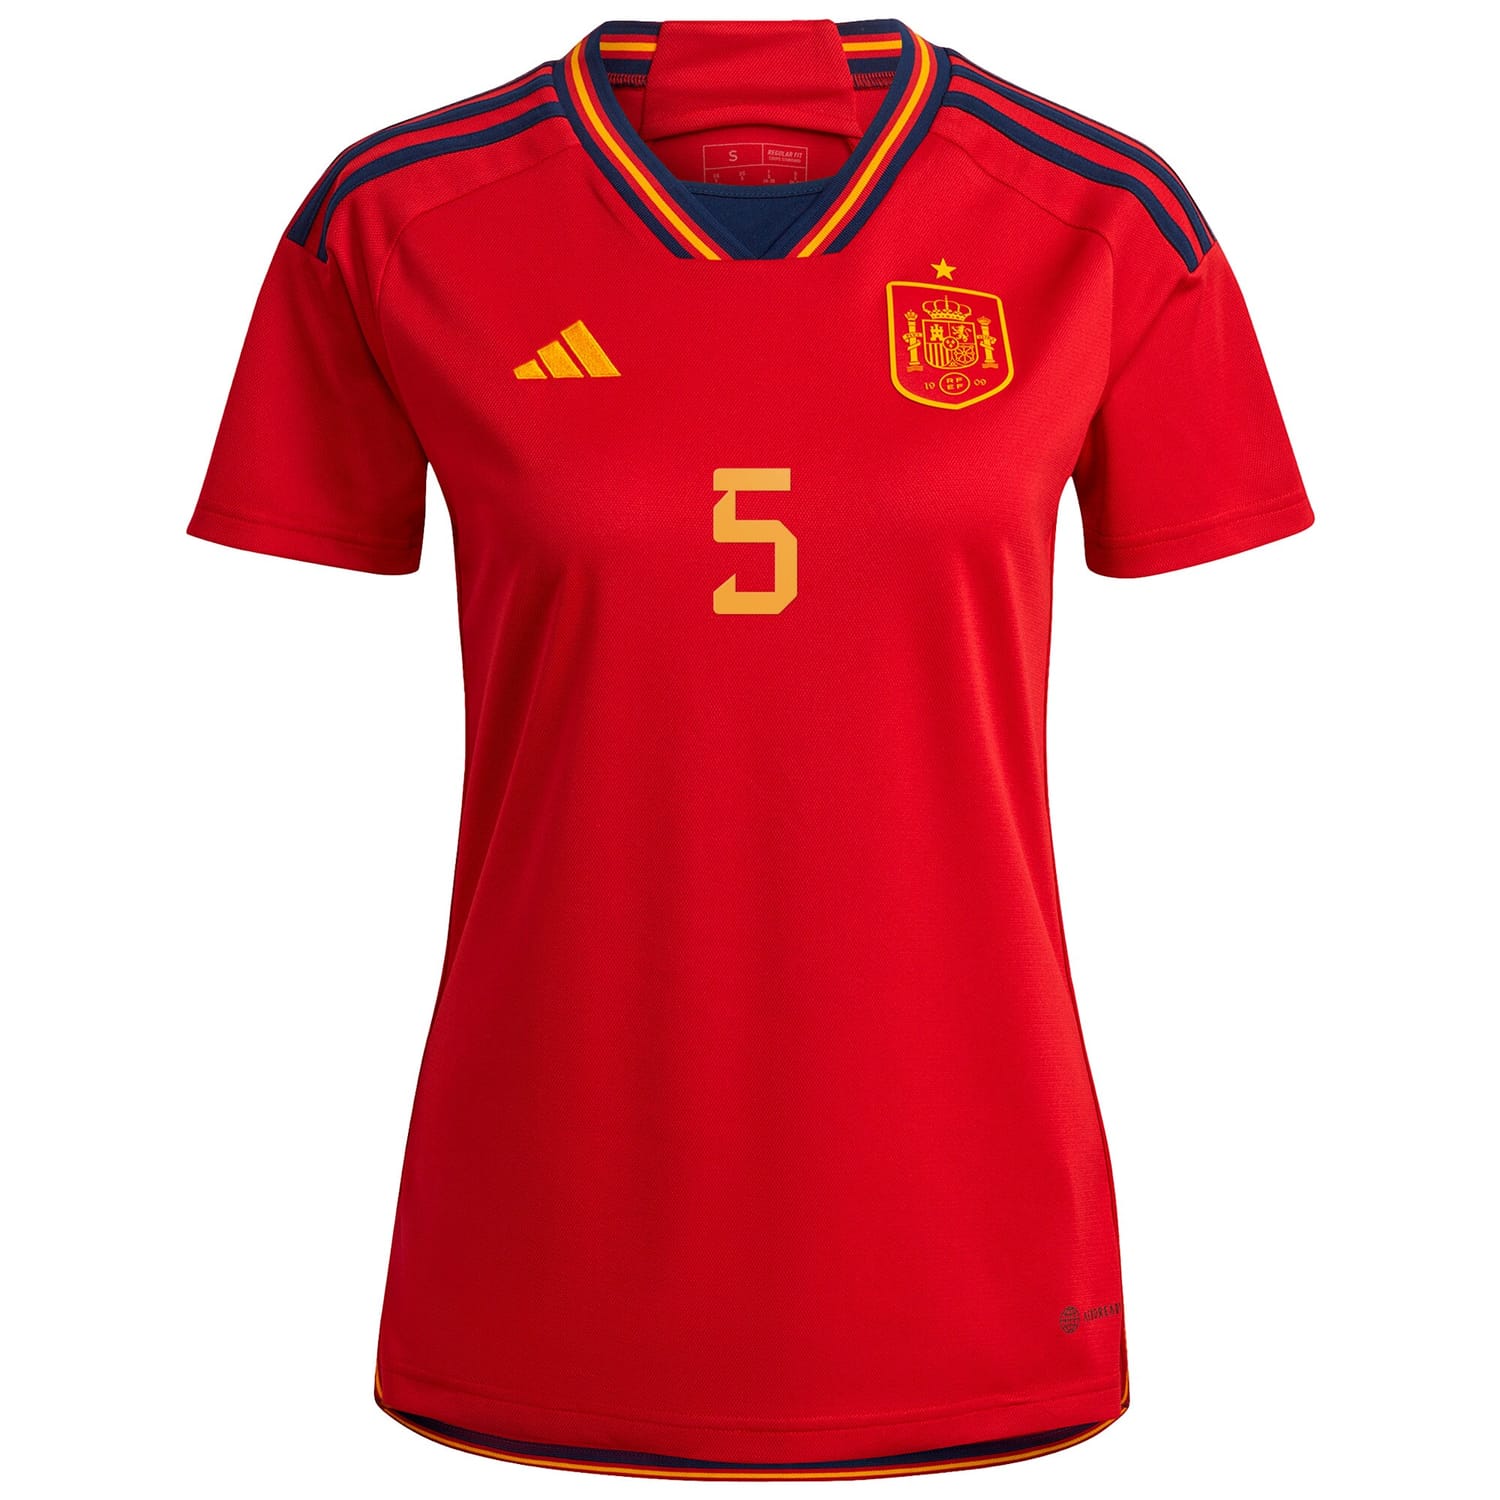 Spain National Team Home Jersey Shirt Red 2022-23 player Sergio Busquets printing for Women